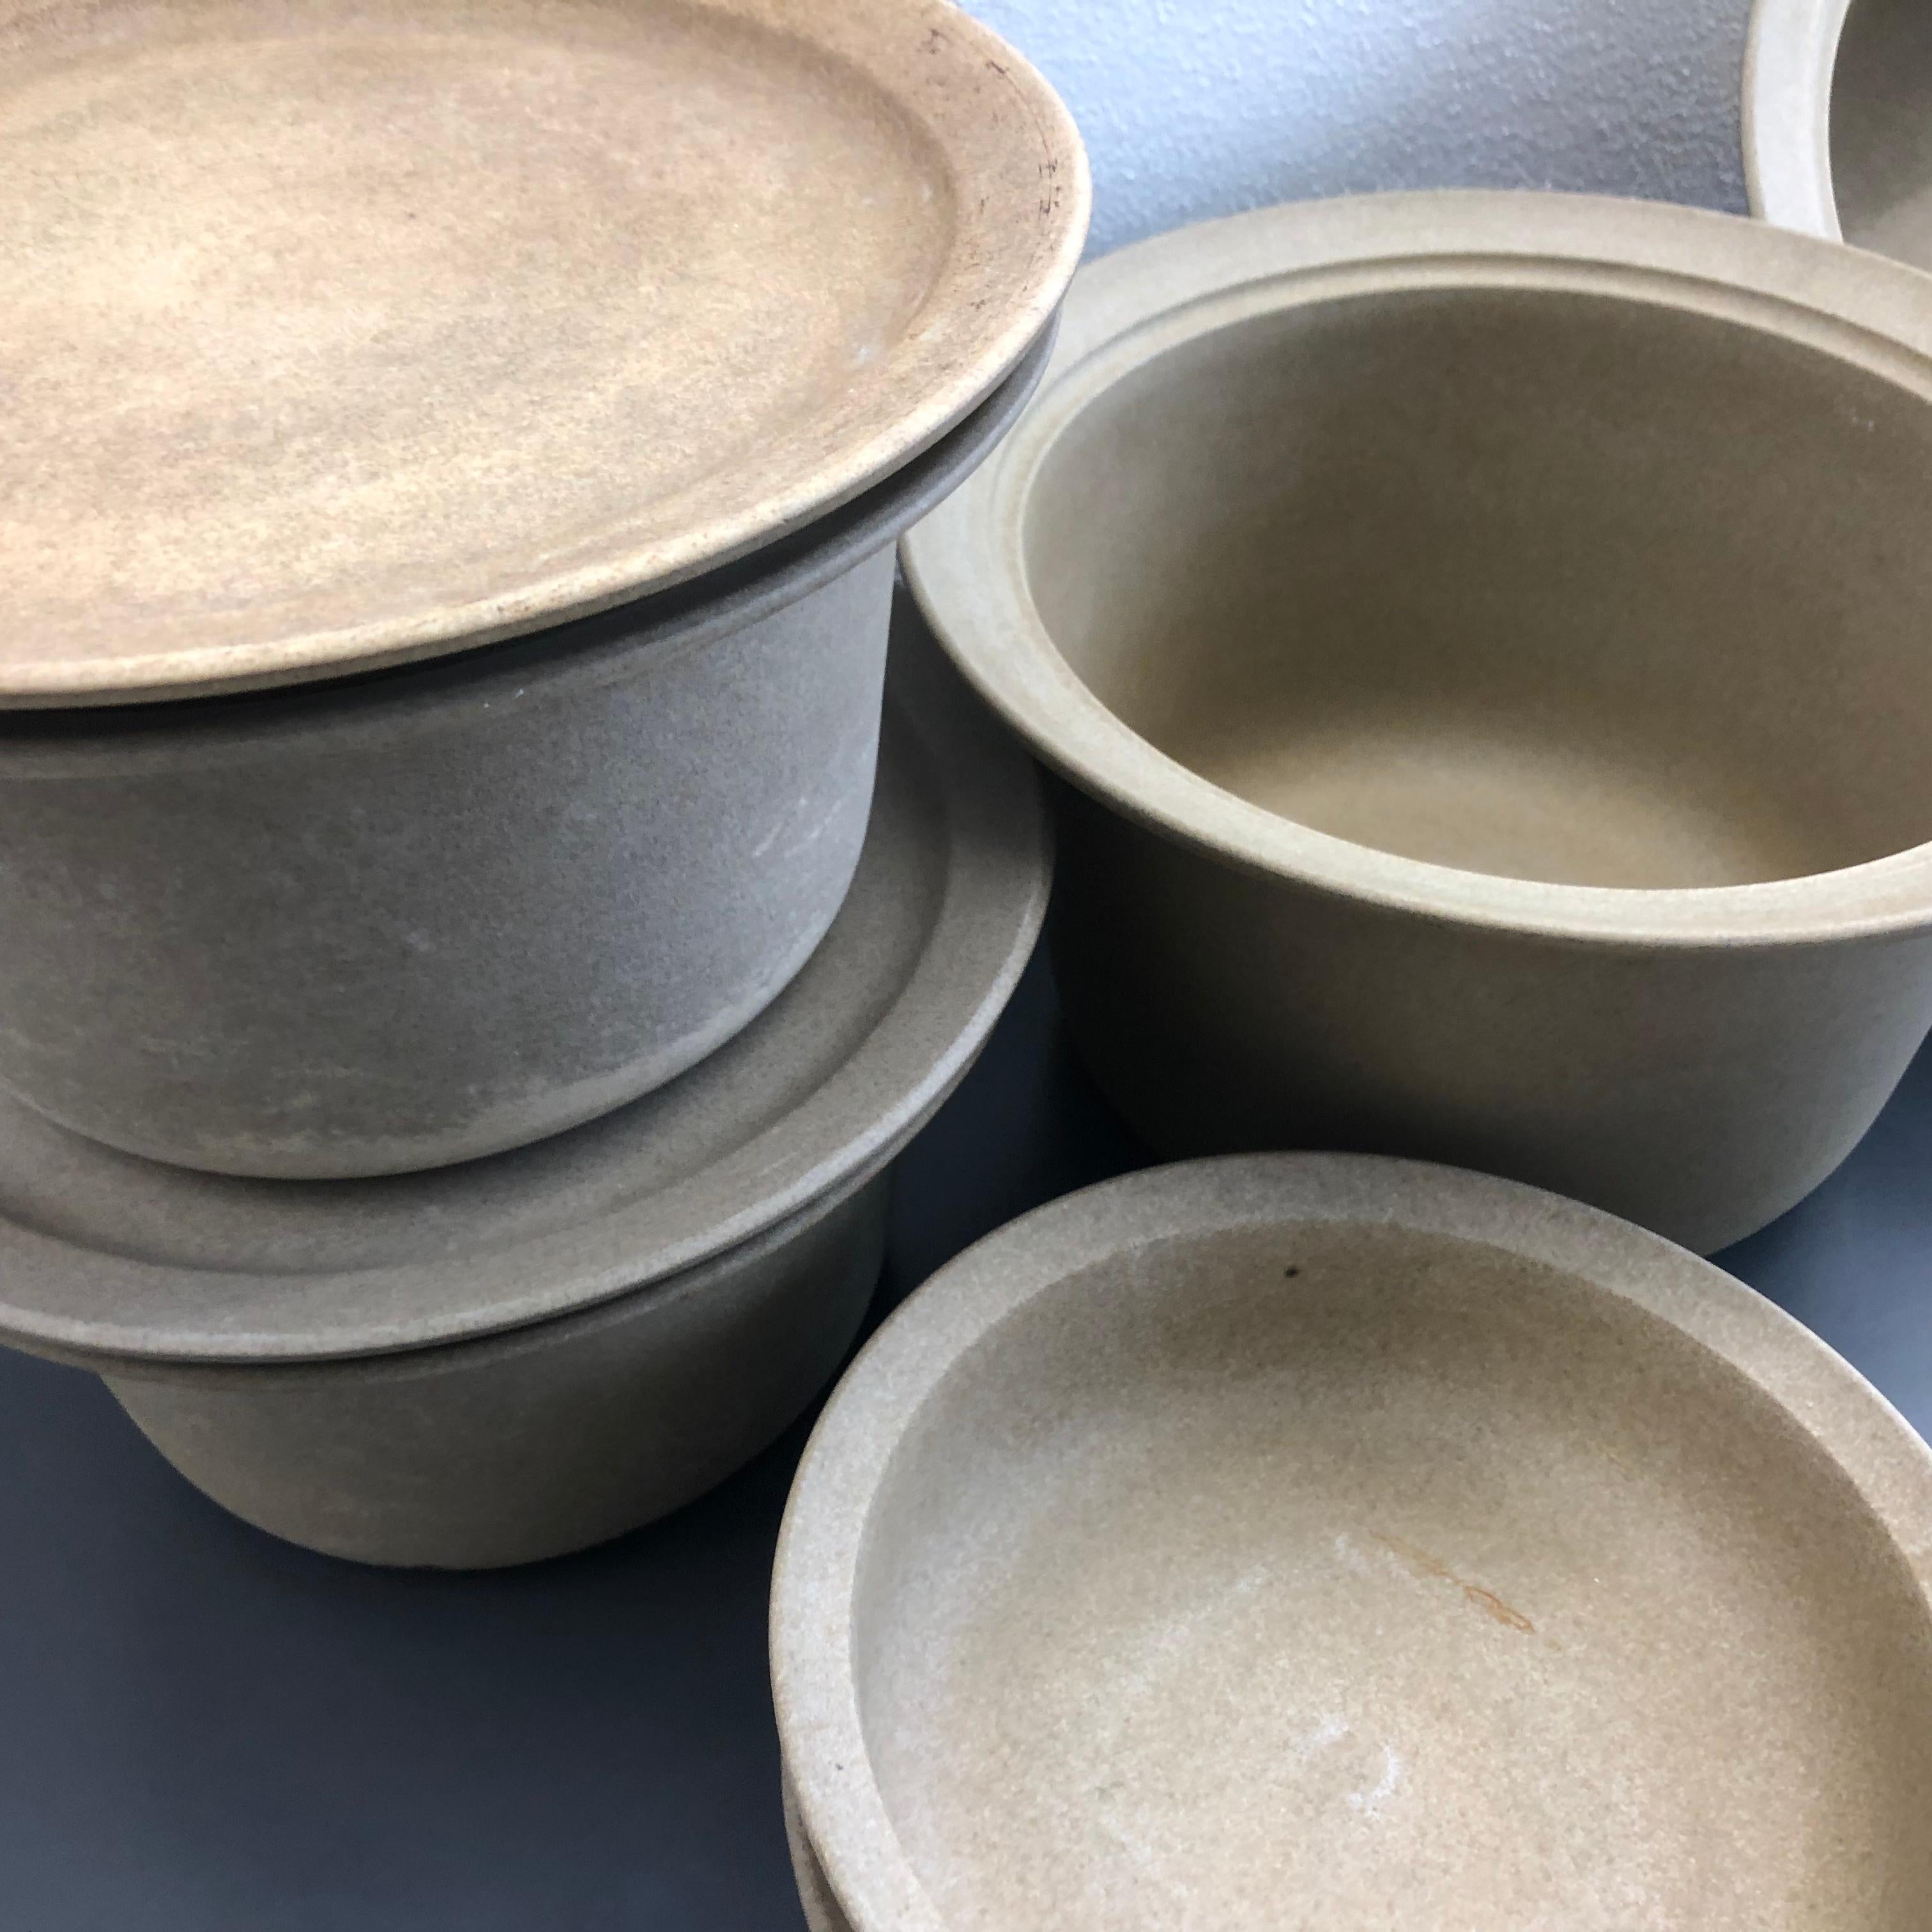 A set of Firepot pots from Royal Copenhagen, designed by Grethe Meyer in 1976.

Grethe Meyer designed Fire Pot for Royal Copenhagen in 1976. The series was taken out of production around 1986.

She was asked to develop a series of fireproof dishes